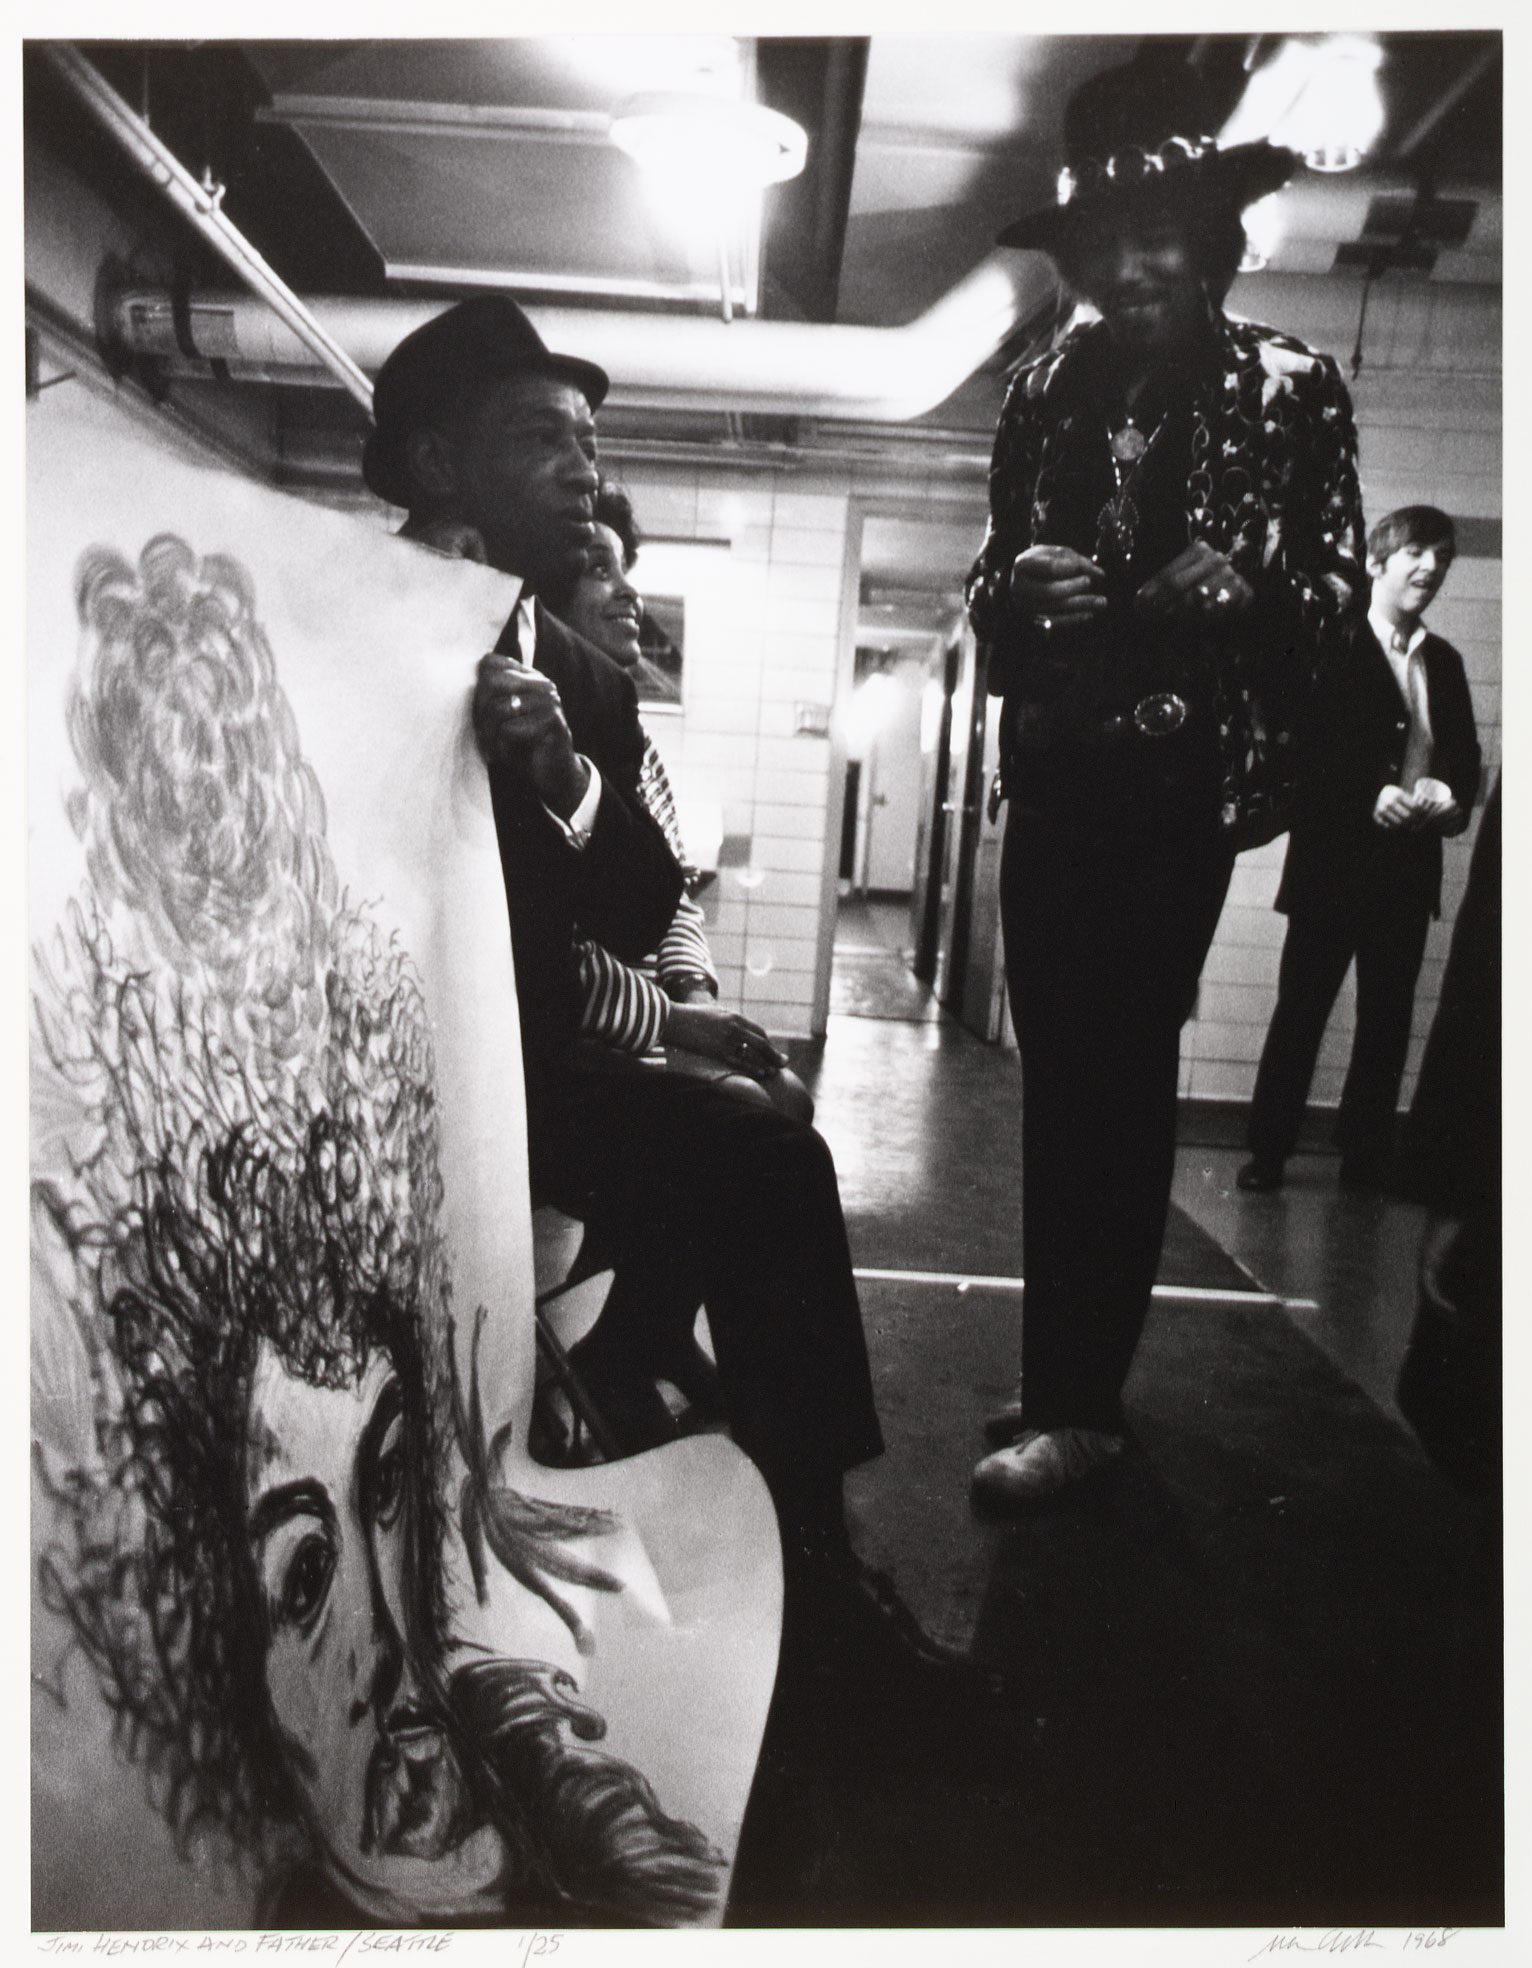 Al Hendrix and Jimi Hendrix backstage at the Seattle Center Arena, Seattle, WA, February 12, 1968. Photographer: Ulvis Alberts. MoPOP Permanent Collection